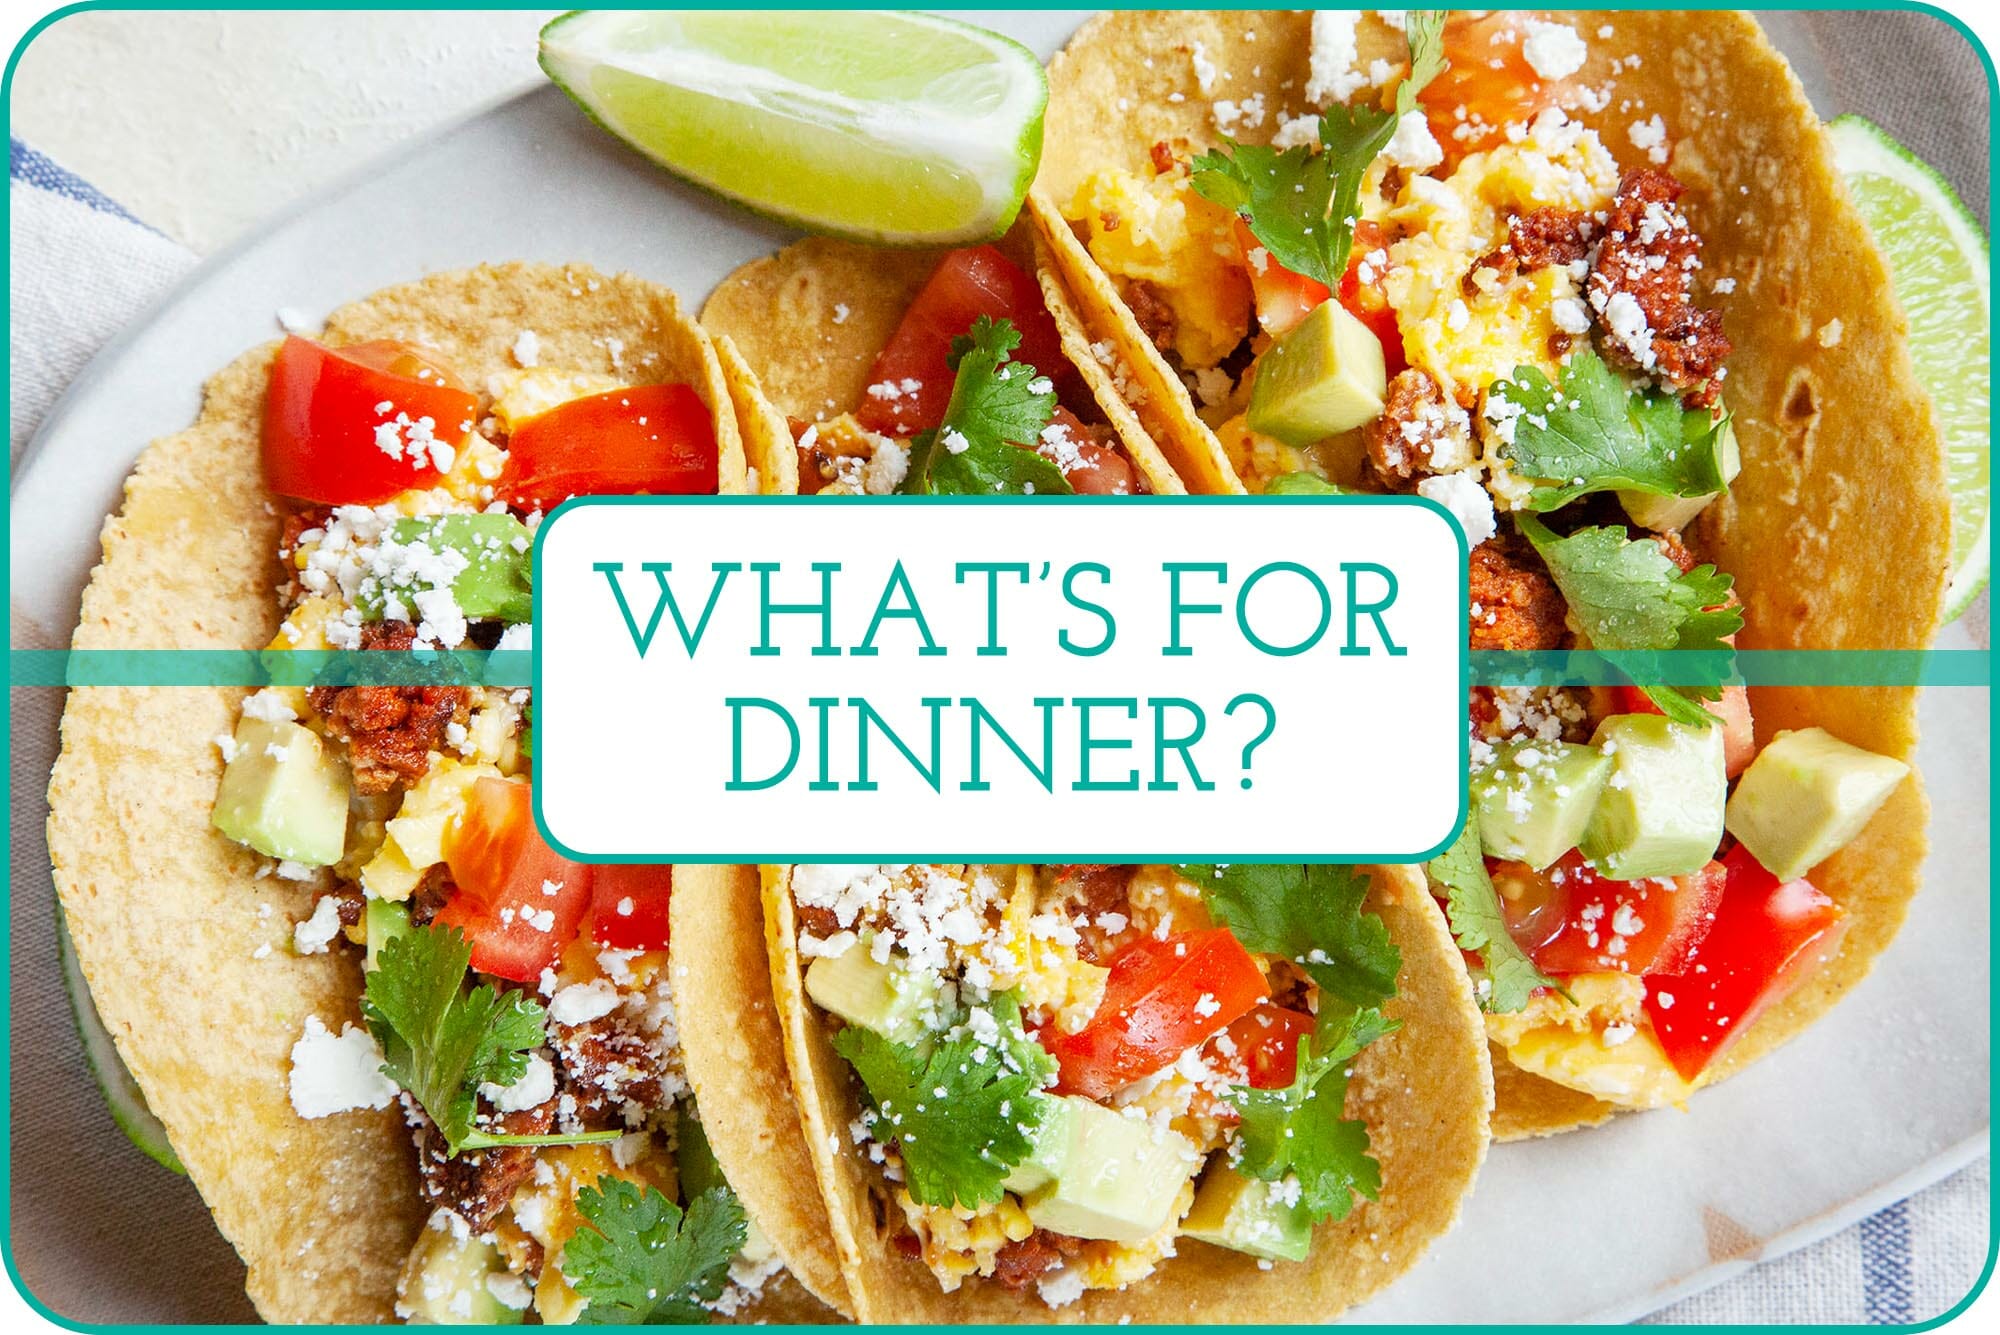 "What's for Dinner" with Chorizo and Egg Breakfast Tacos on a platter behind the caption.